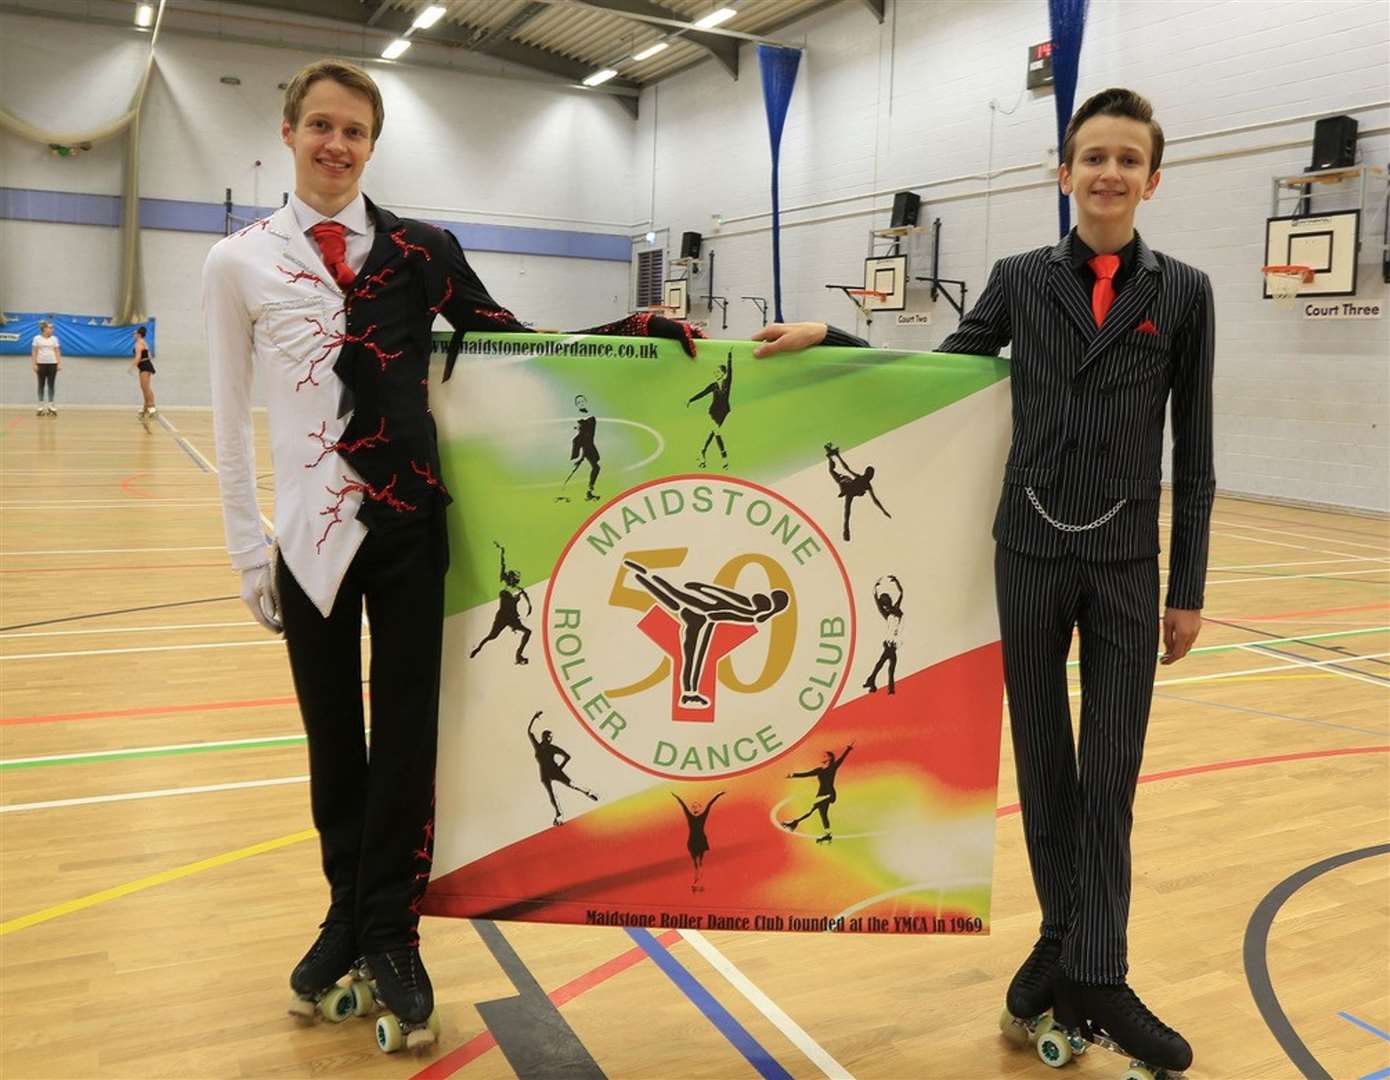 Brothers Oliver and Zac Martin have competed internationally and are part of the Maidstone Roller Dance Club